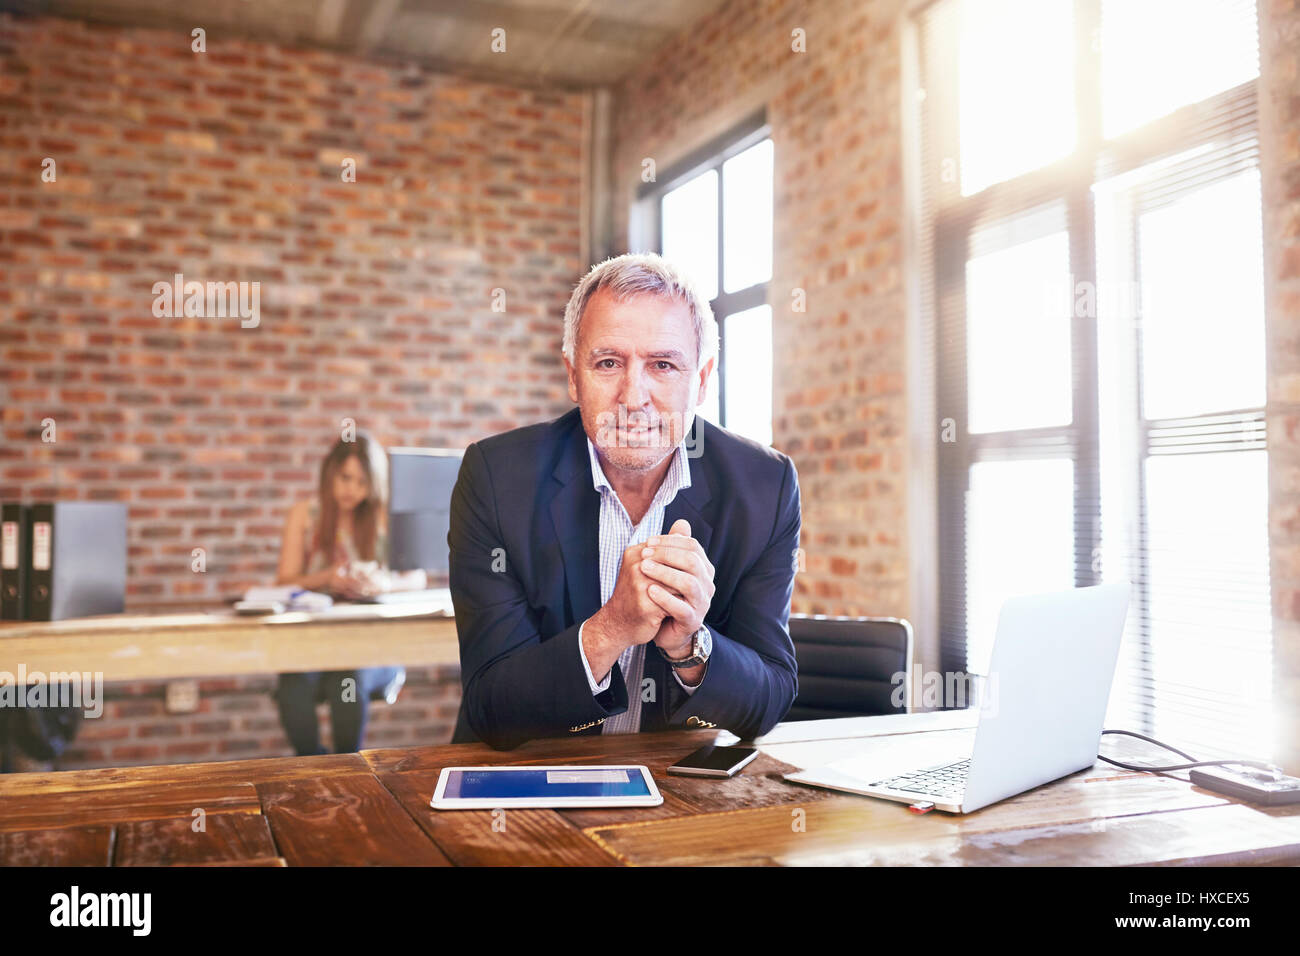 Portrait confident businessman with digital tablet and laptop working in office Stock Photo